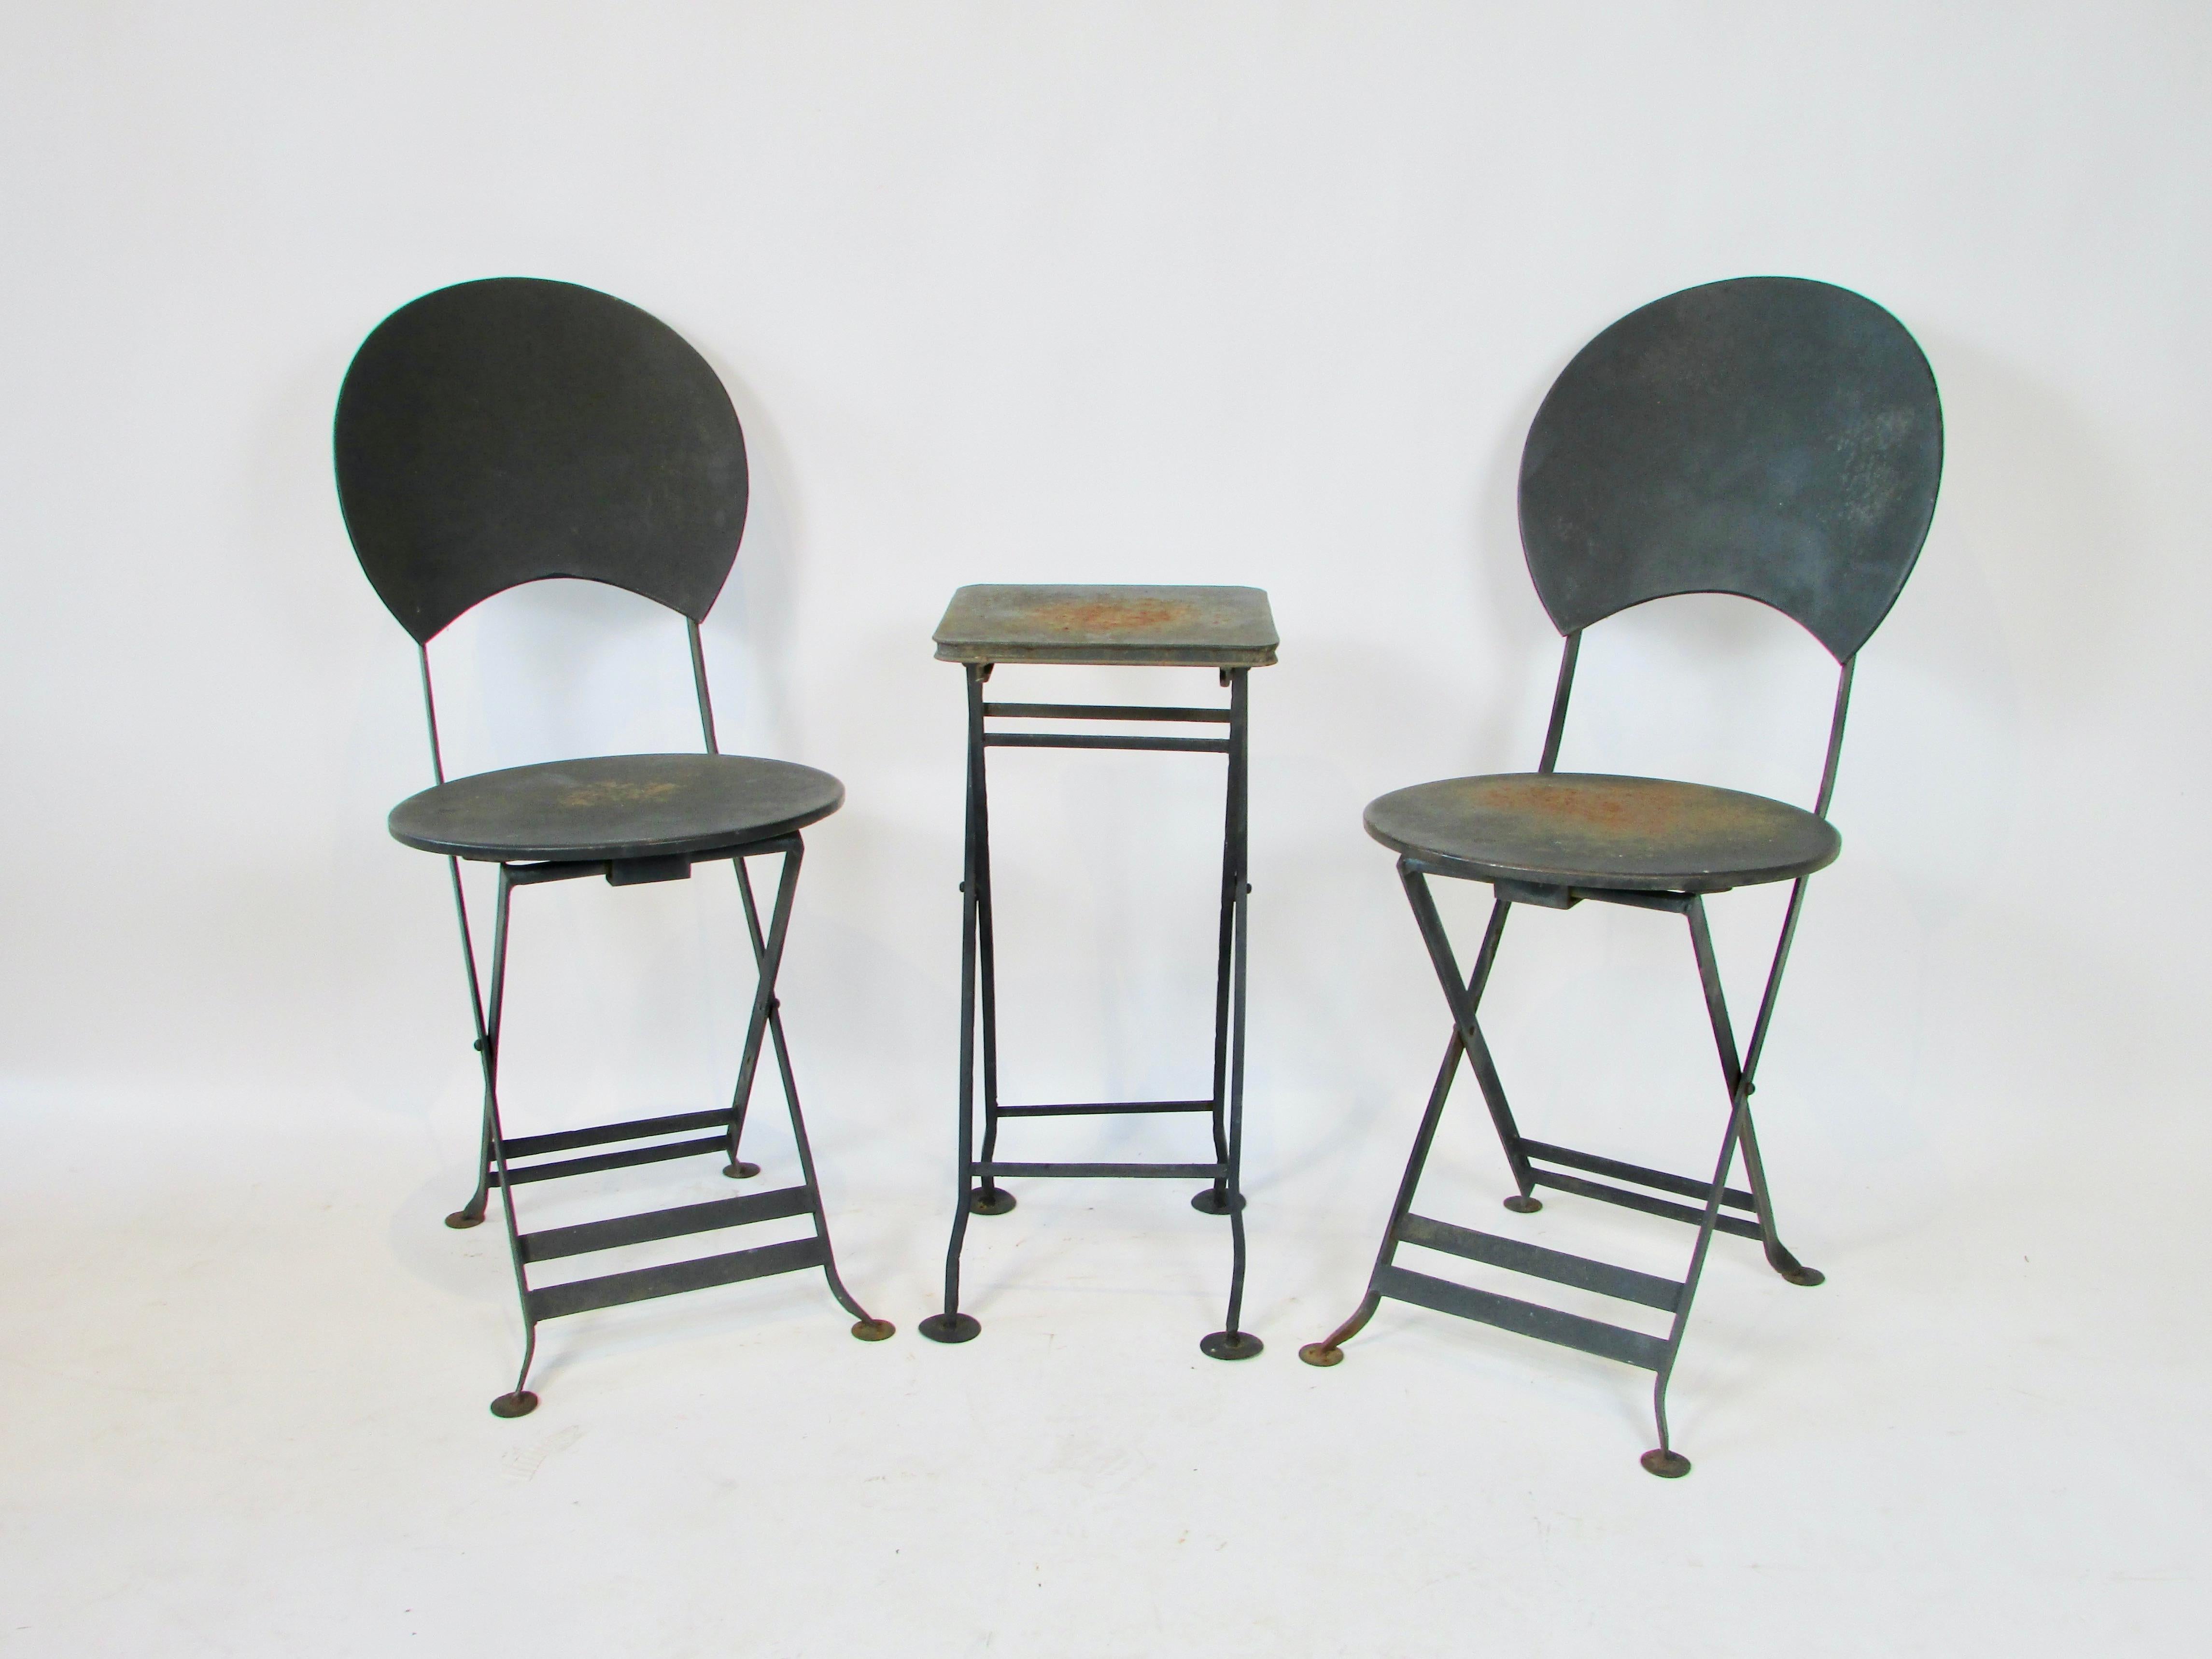 Two French style bistro chairs with compact table ( 10.5 x 11 at 24.5 tall ) . Welded steel frames support 15.25